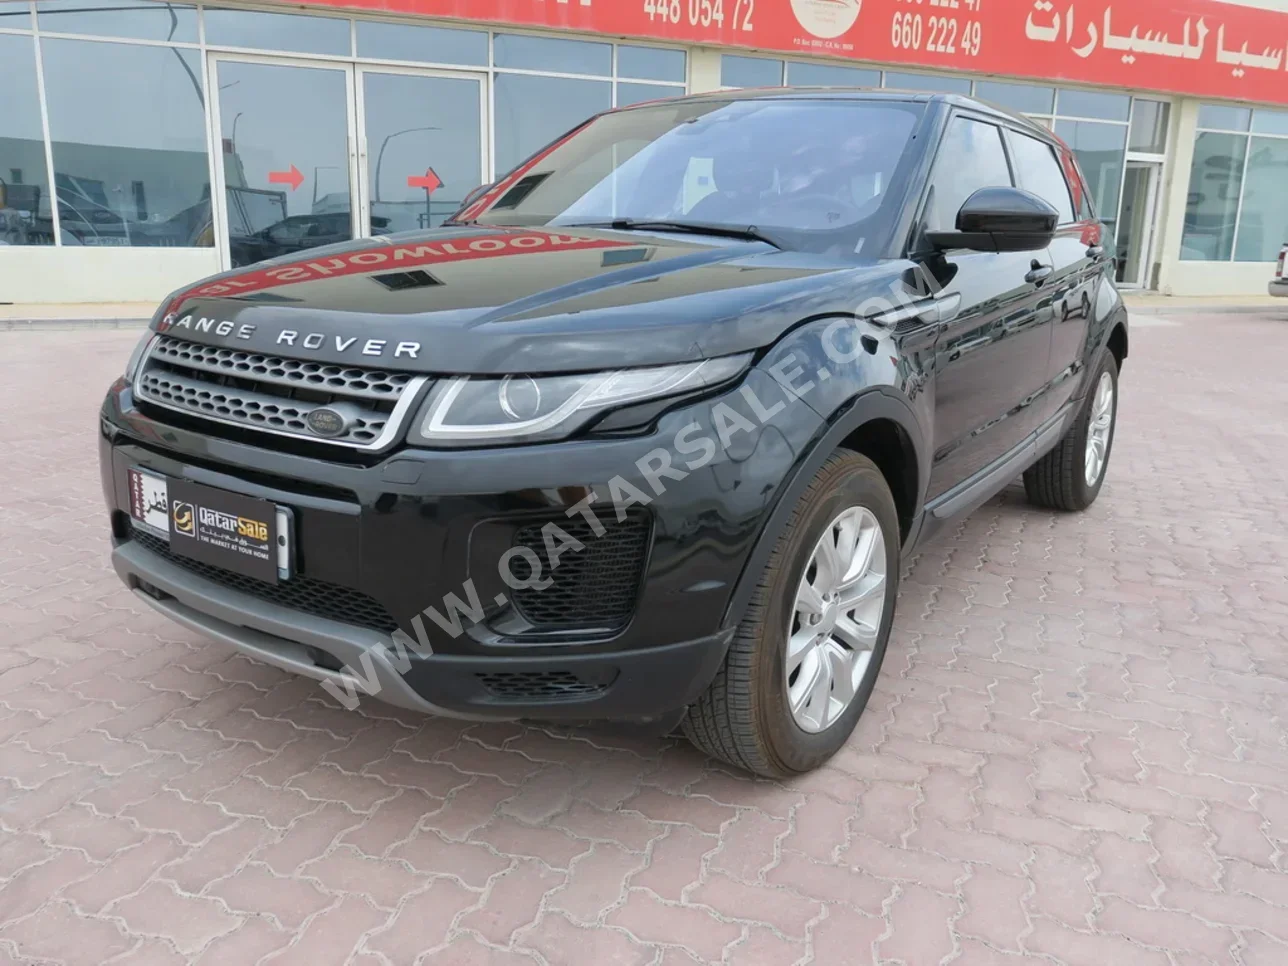 Land Rover  Evoque  Dynamic  2018  Automatic  123,000 Km  4 Cylinder  All Wheel Drive (AWD)  SUV  Black